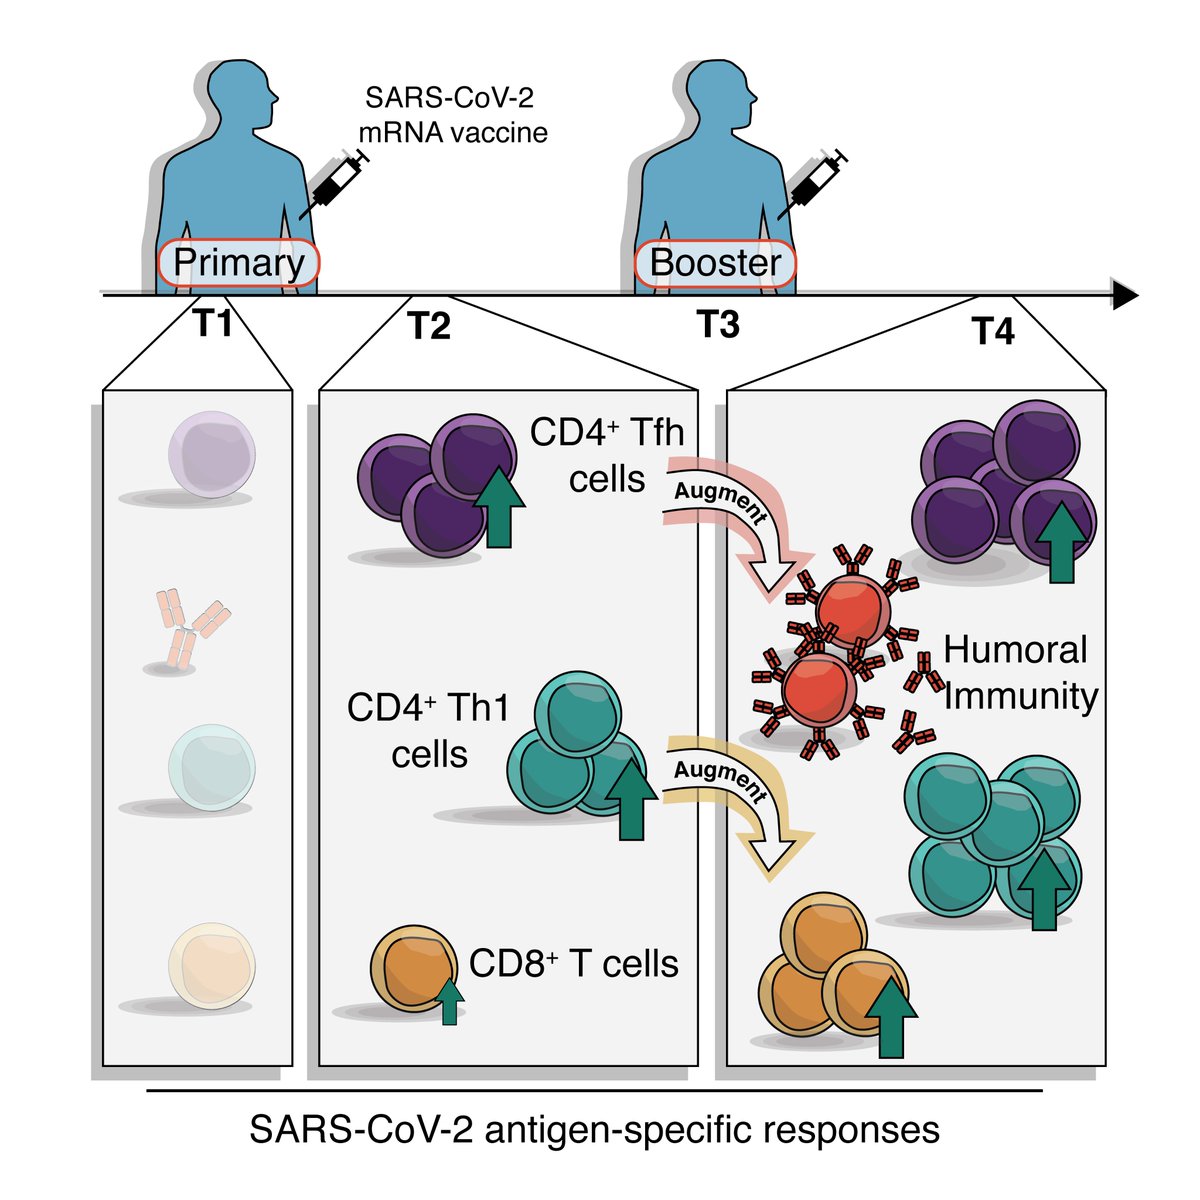 Our study on T cell responses to SARS-CoV-2 mRNA vaccines is up! Are T cells primed by the vaccines? Do they have features of long-lived memory cells?Do they contribute to the overall immune response?A thread on the key findings below  https://www.biorxiv.org/content/10.1101/2021.04.21.440862v1